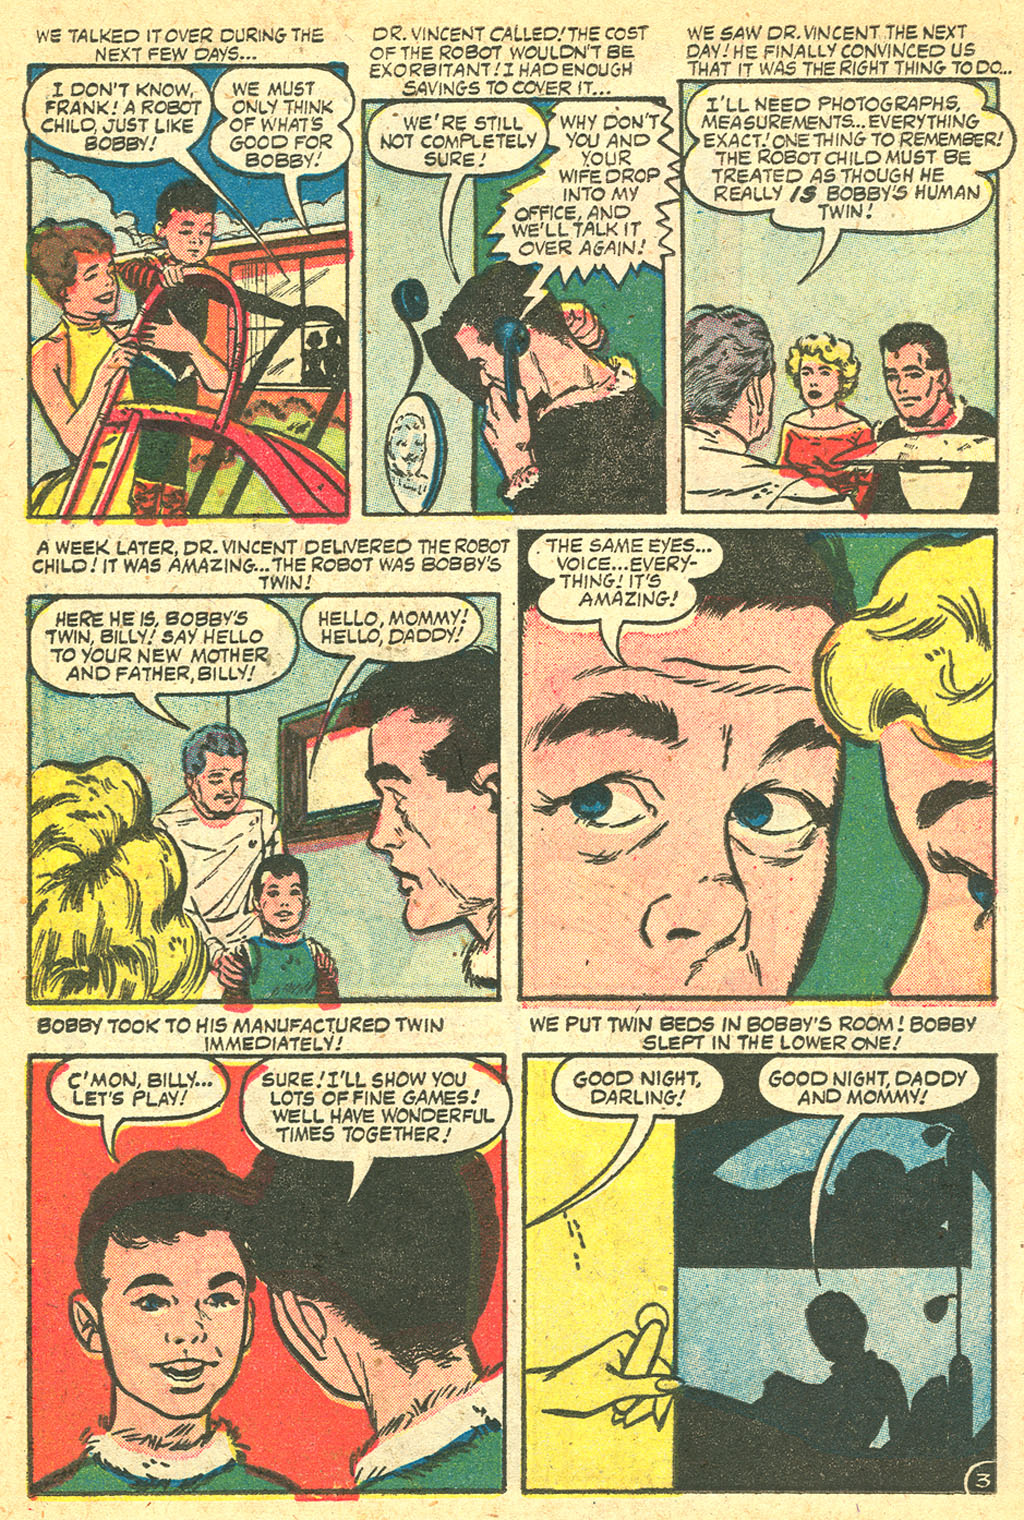 Marvel Tales (1949) 133 Page 11